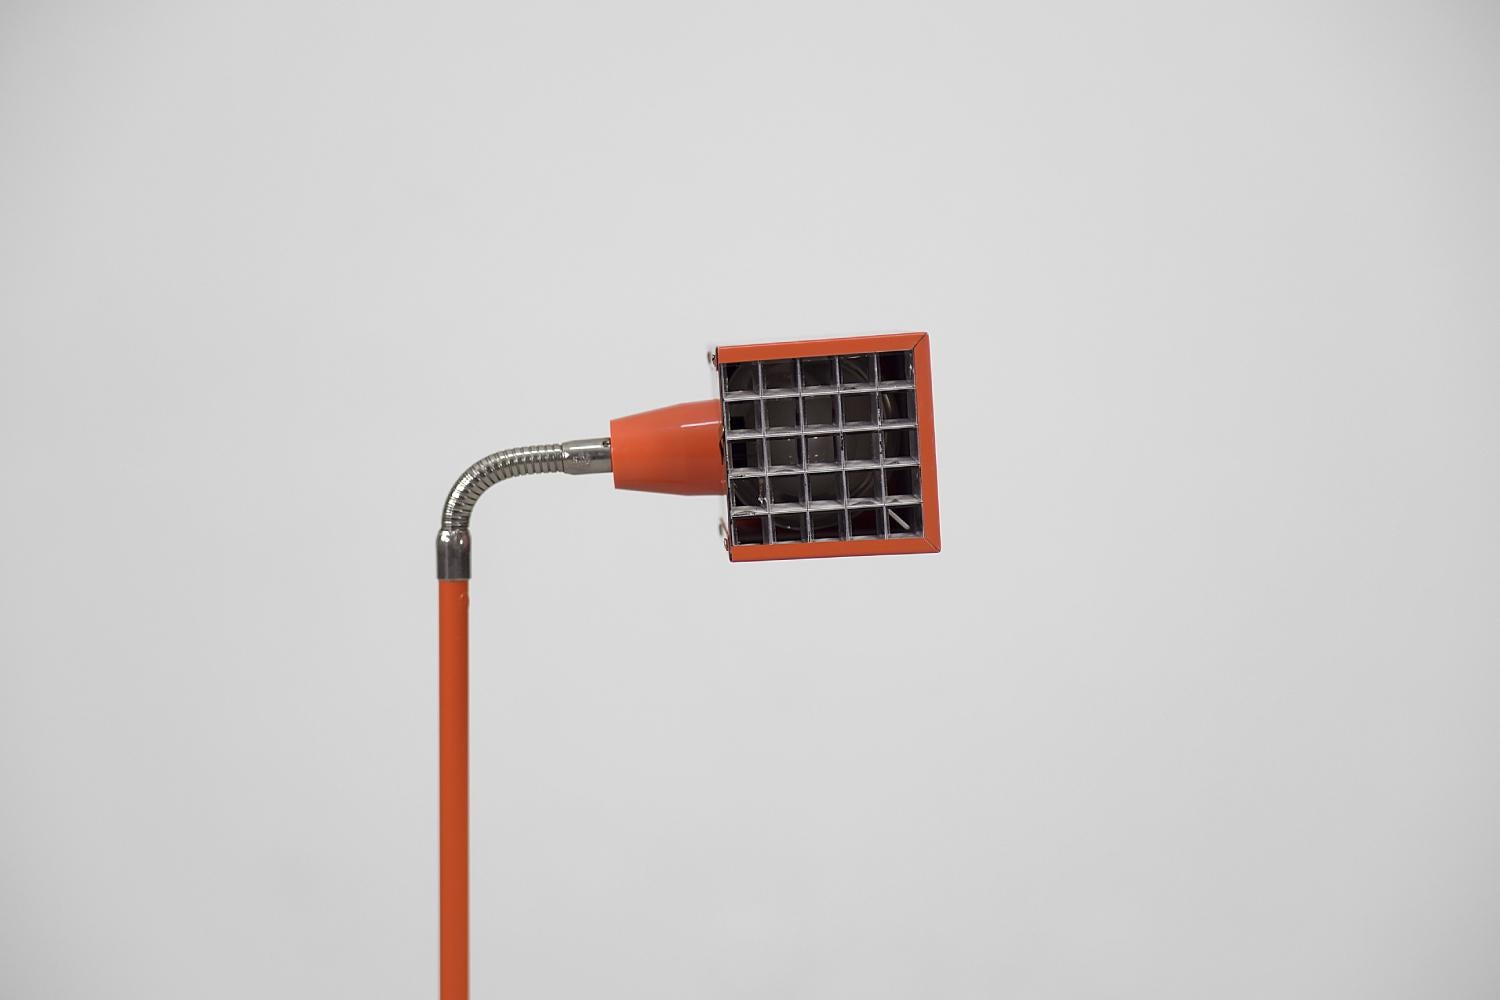 This Kuben floor lamp was designed by Björn Svensson for the Swedish Elidus manufacture during the 1970s. The cube-shaped lamp is made of metal in the iconic orange-red color. It has a flexible element at the lampshade that makes it easy to change